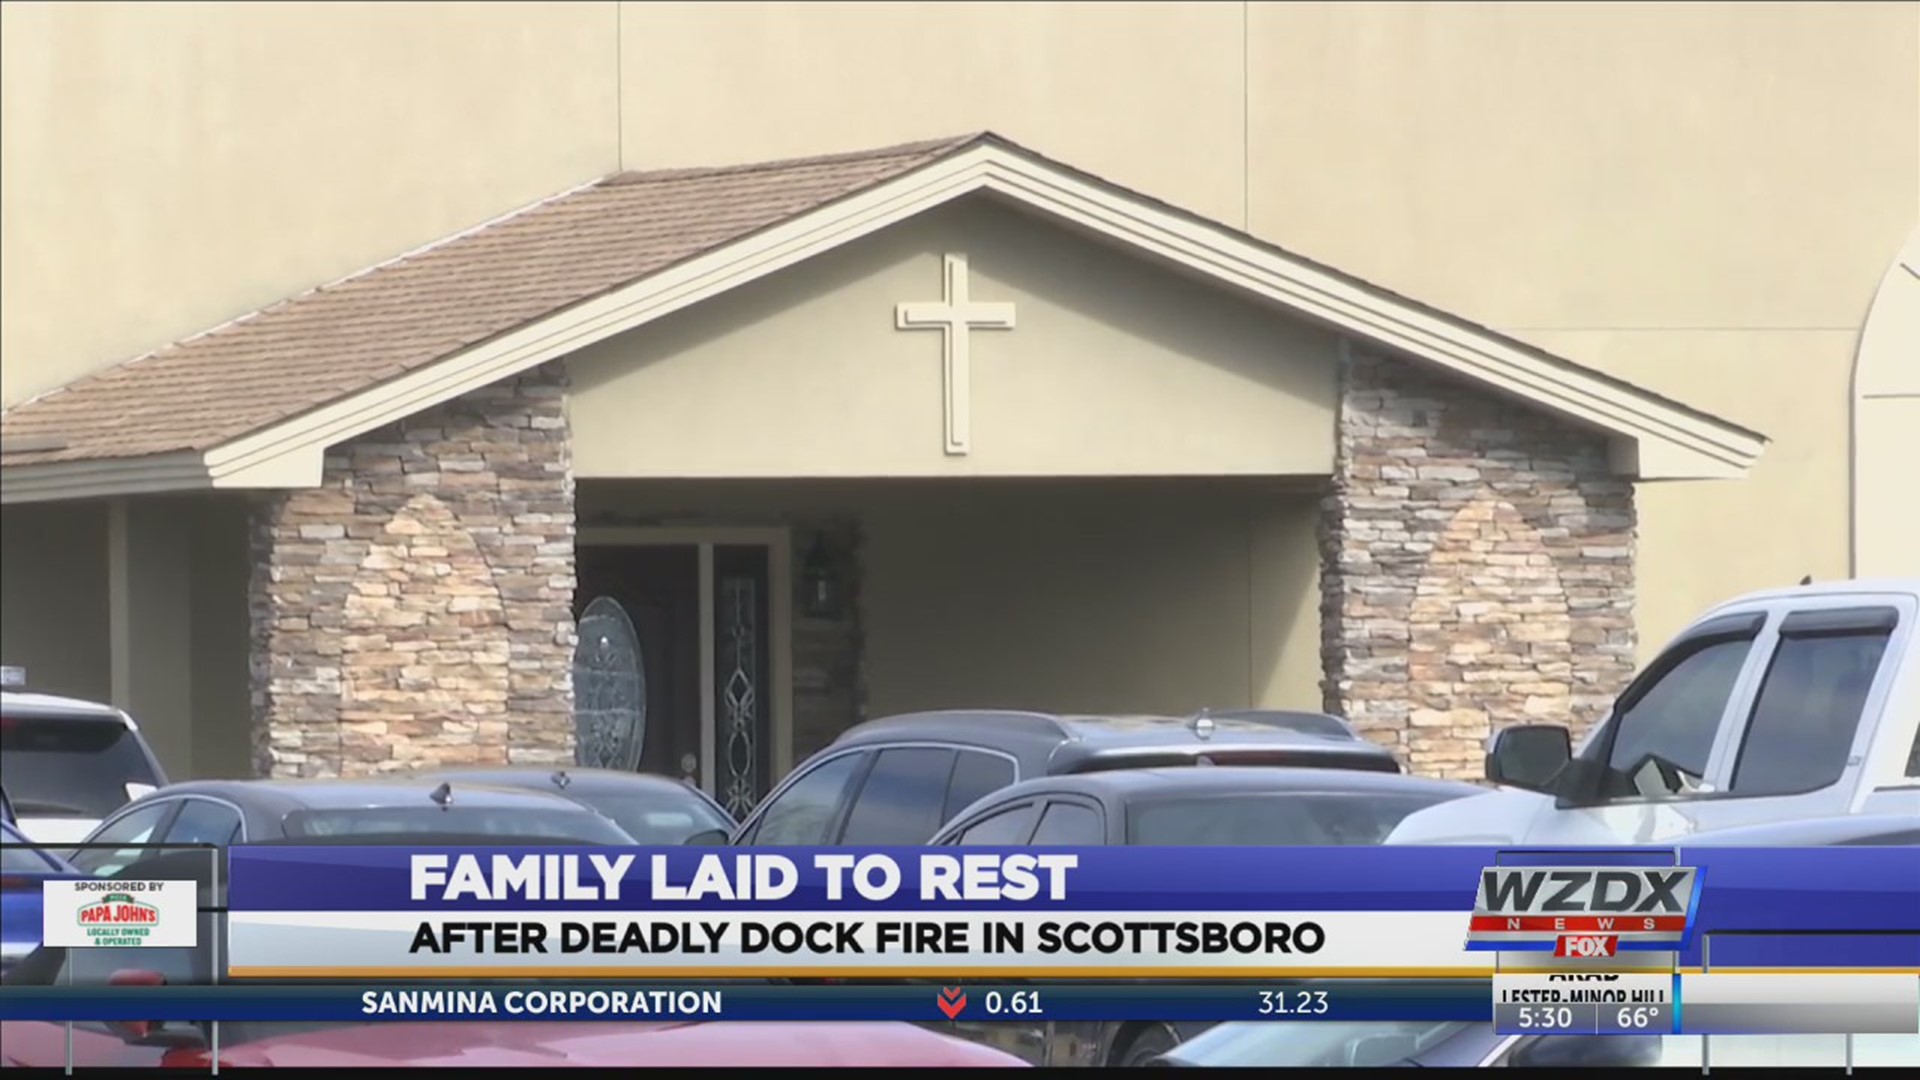 It’s been one week since the dock fire in Scottsboro killed eight people and destroyed at least 35 boats. Six of the eight people killed in the fire were all from the same family and were laid to rest today. A funeral was held Monday, February 3rd at 2:00 pm for Grace Miles and her kids, Zane, Trayden, Kesston, Bryli, and Dezli at Valley Funeral Home in Stevenson. The family was buried together.